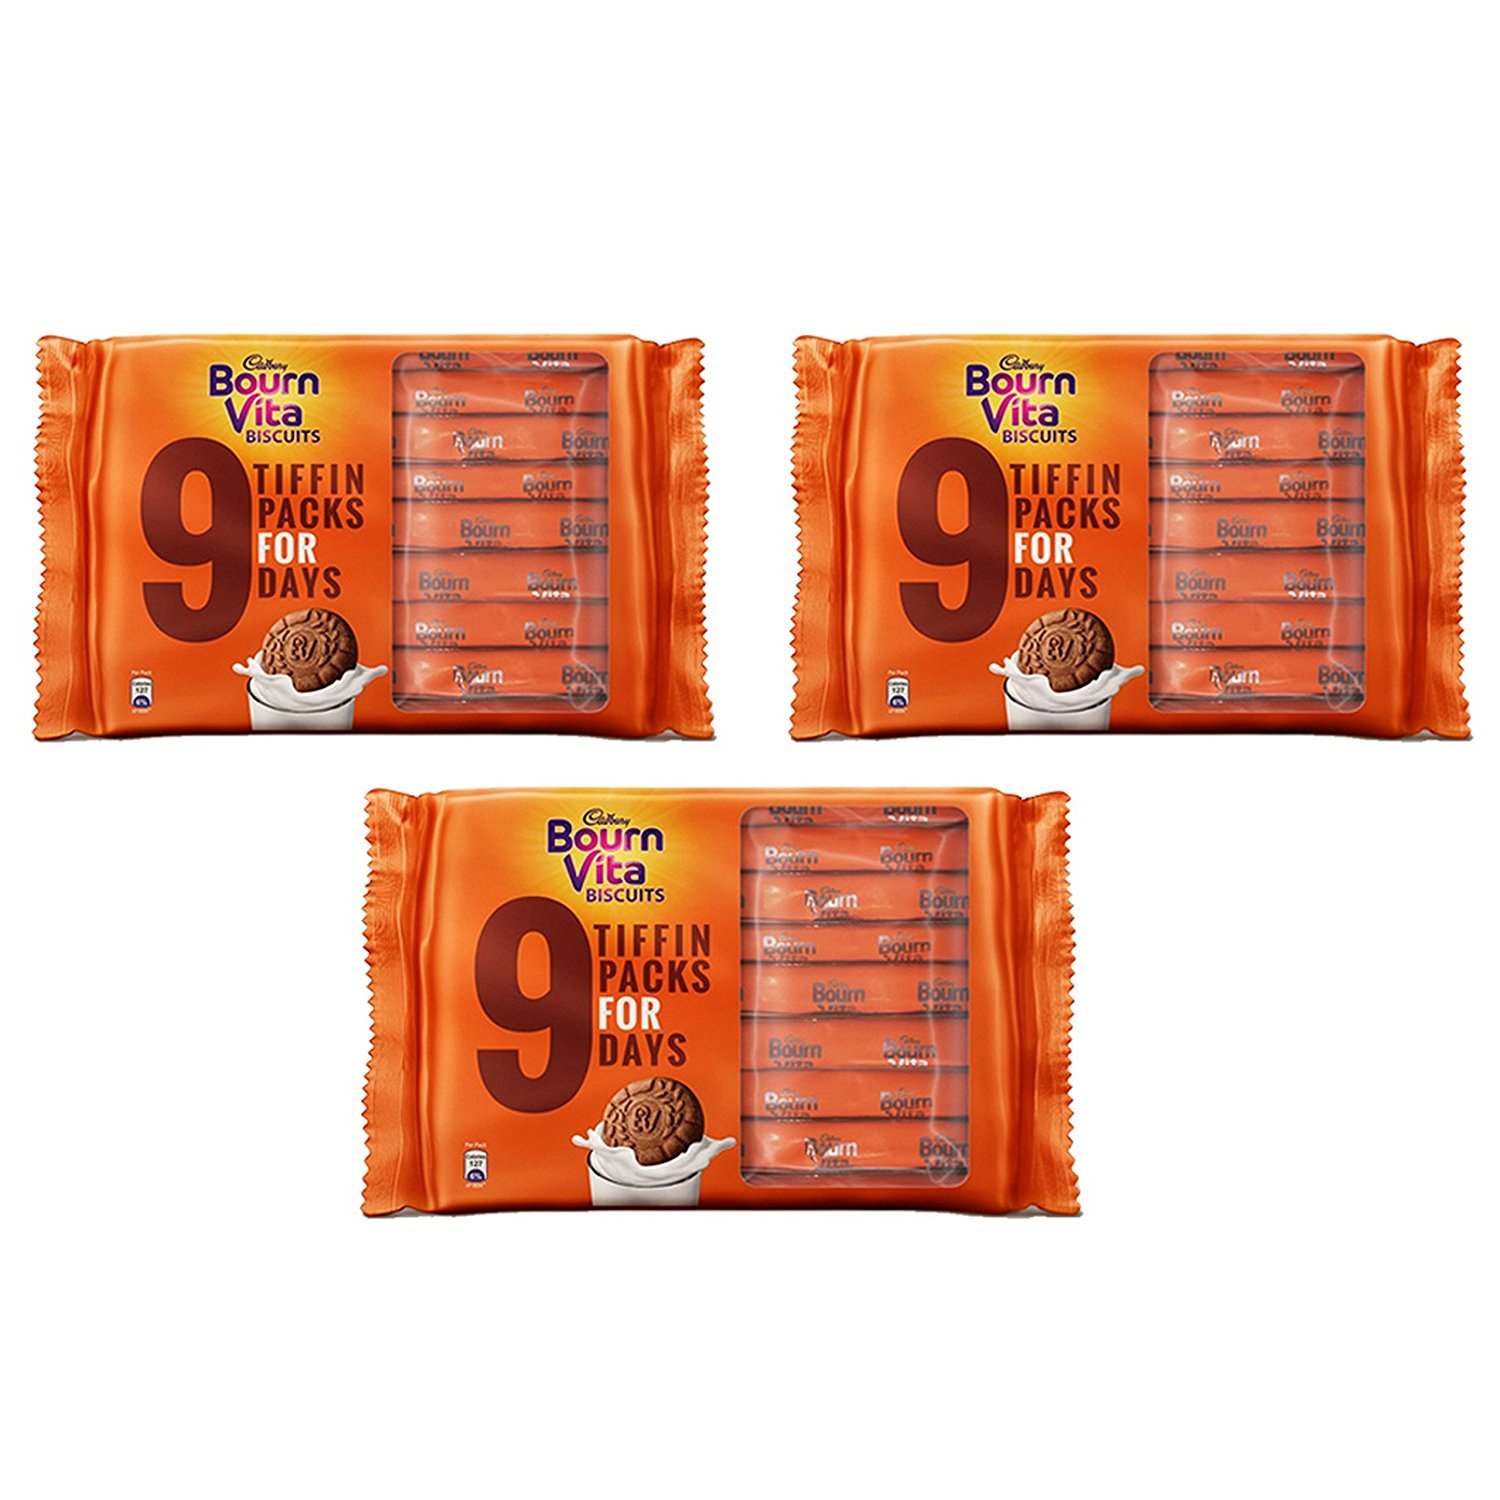 Amazon - Cadbury Bournvita Crunchy Cookies, Tiffin Pack 250 gm (Pack of 3) in only Rs.90